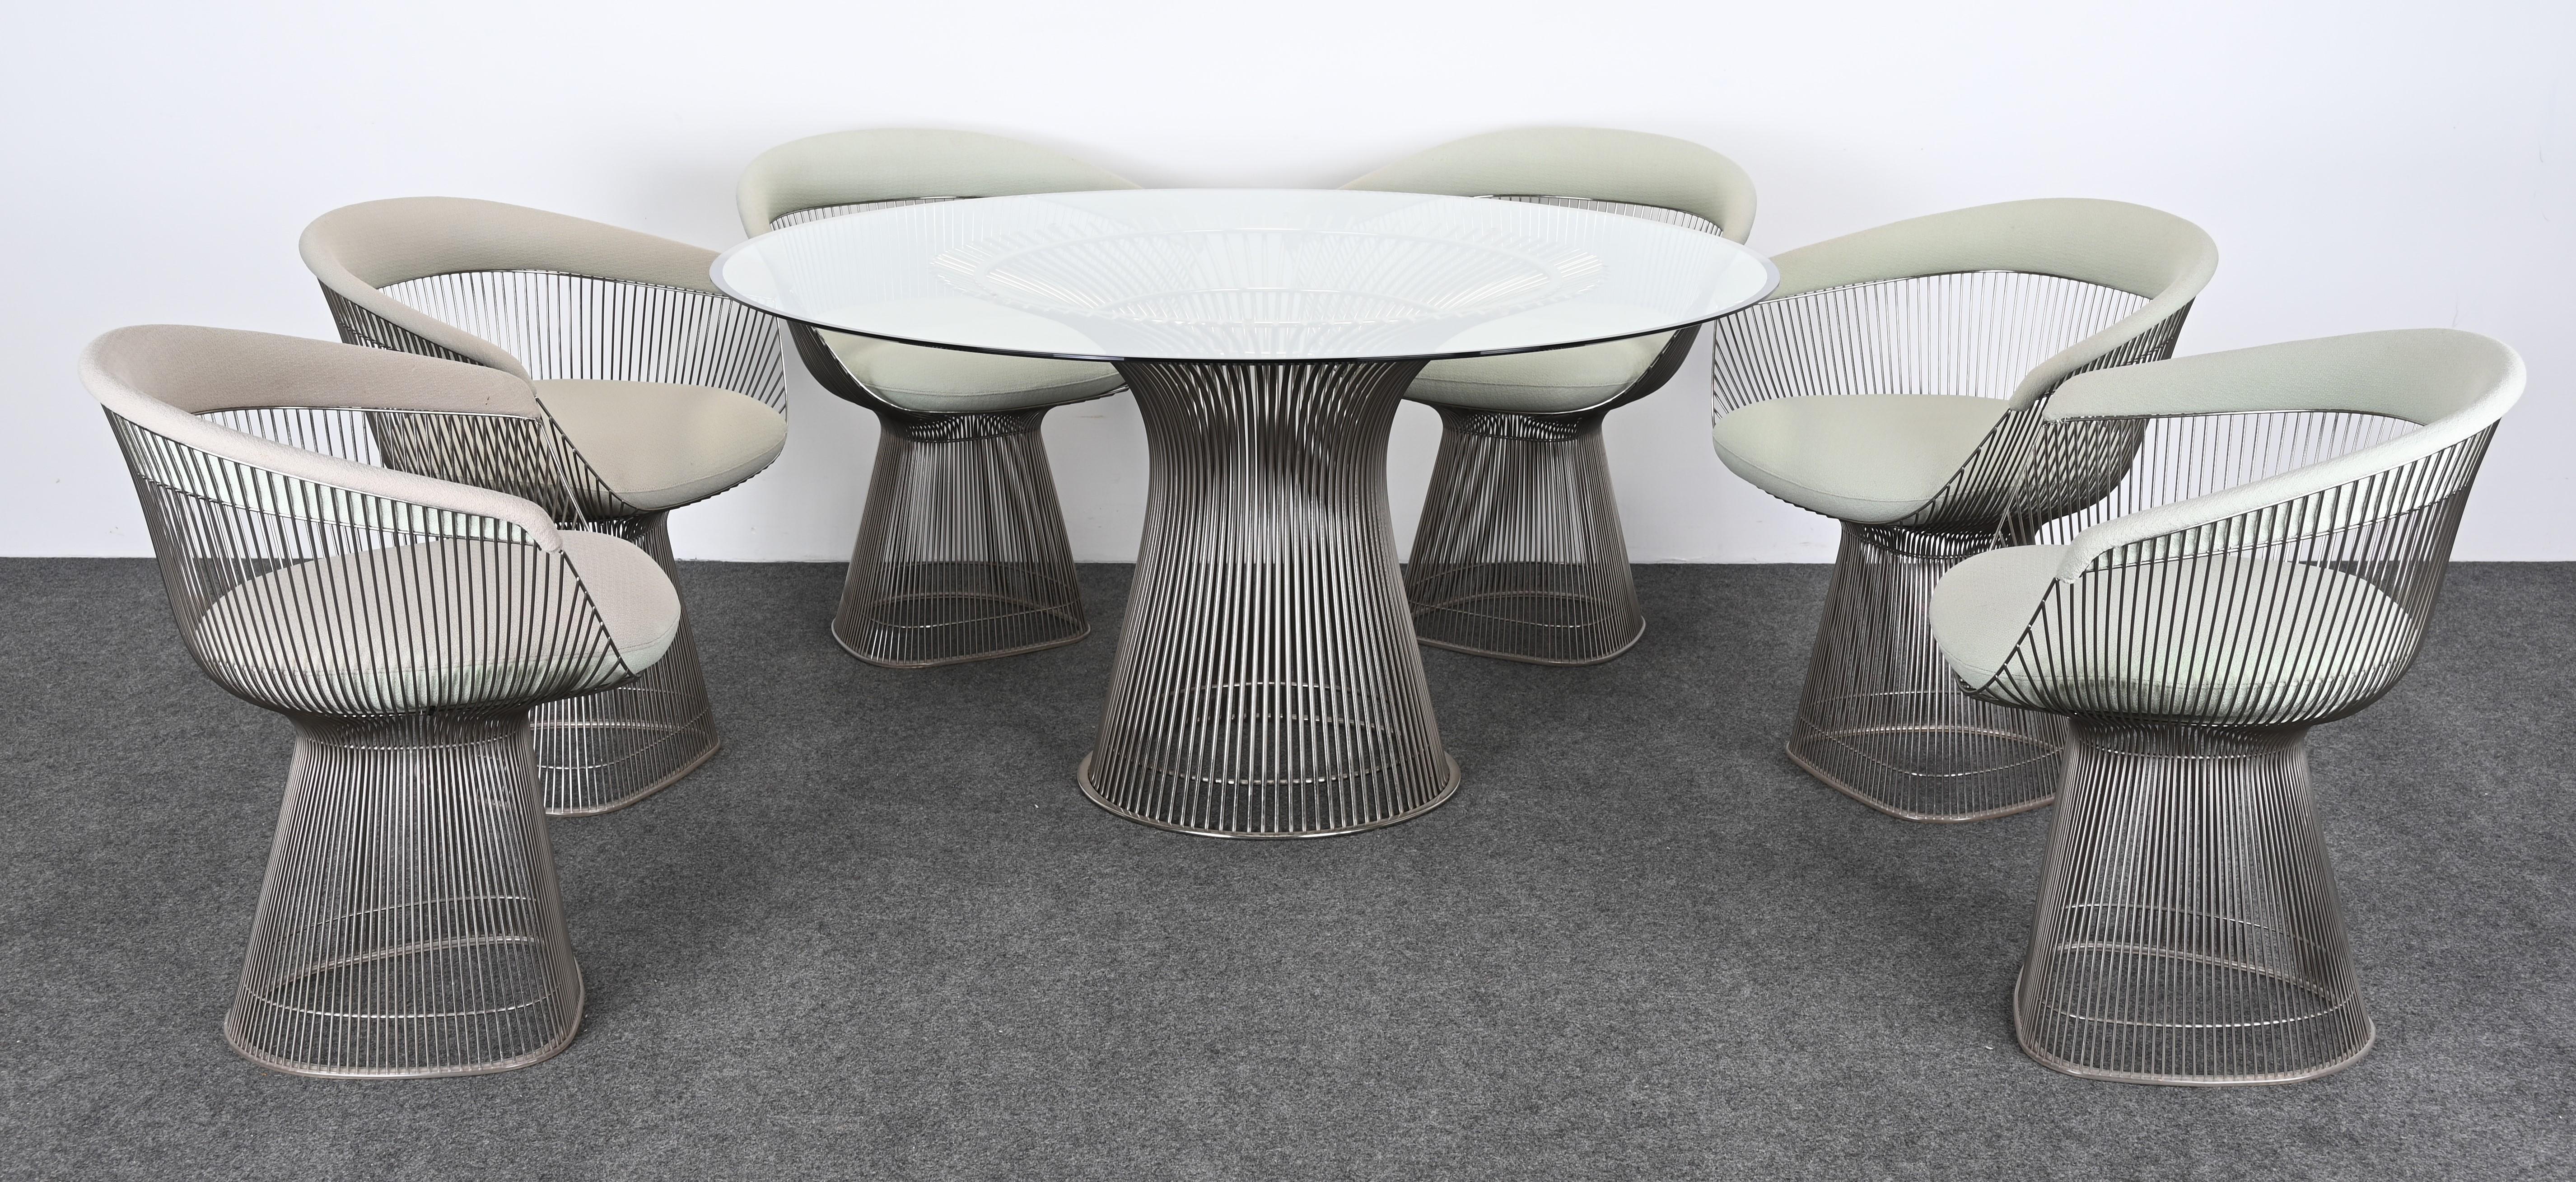 Italian Knoll Dining Table Designed by Warren Platner, 20th Century For Sale